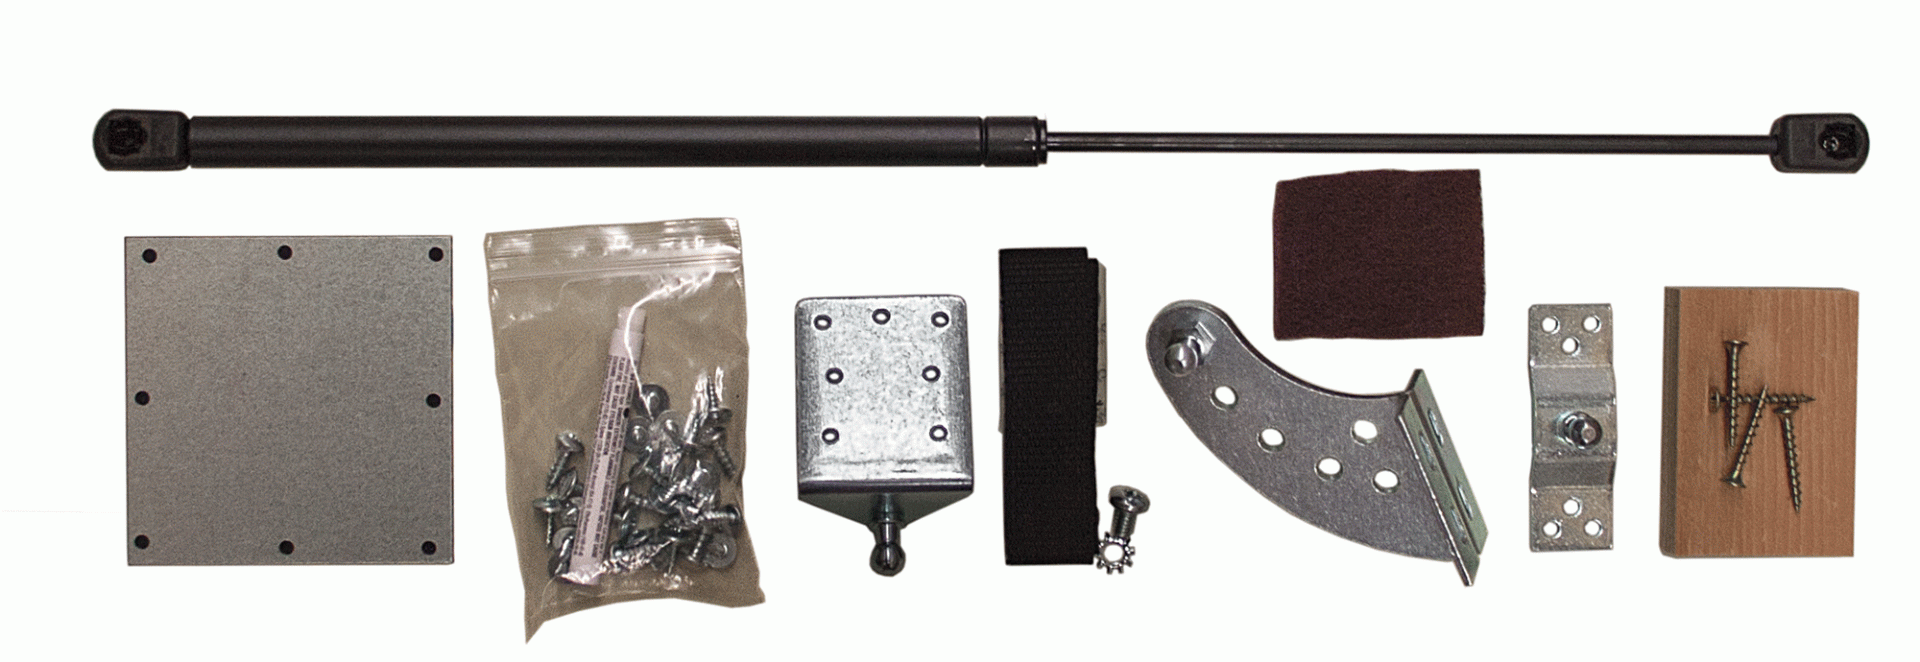 Hatchlift Products LLC | HLK-STD | Hydraulic Gas Spring Kit Standard for RV Doors 21" To 26" Tall